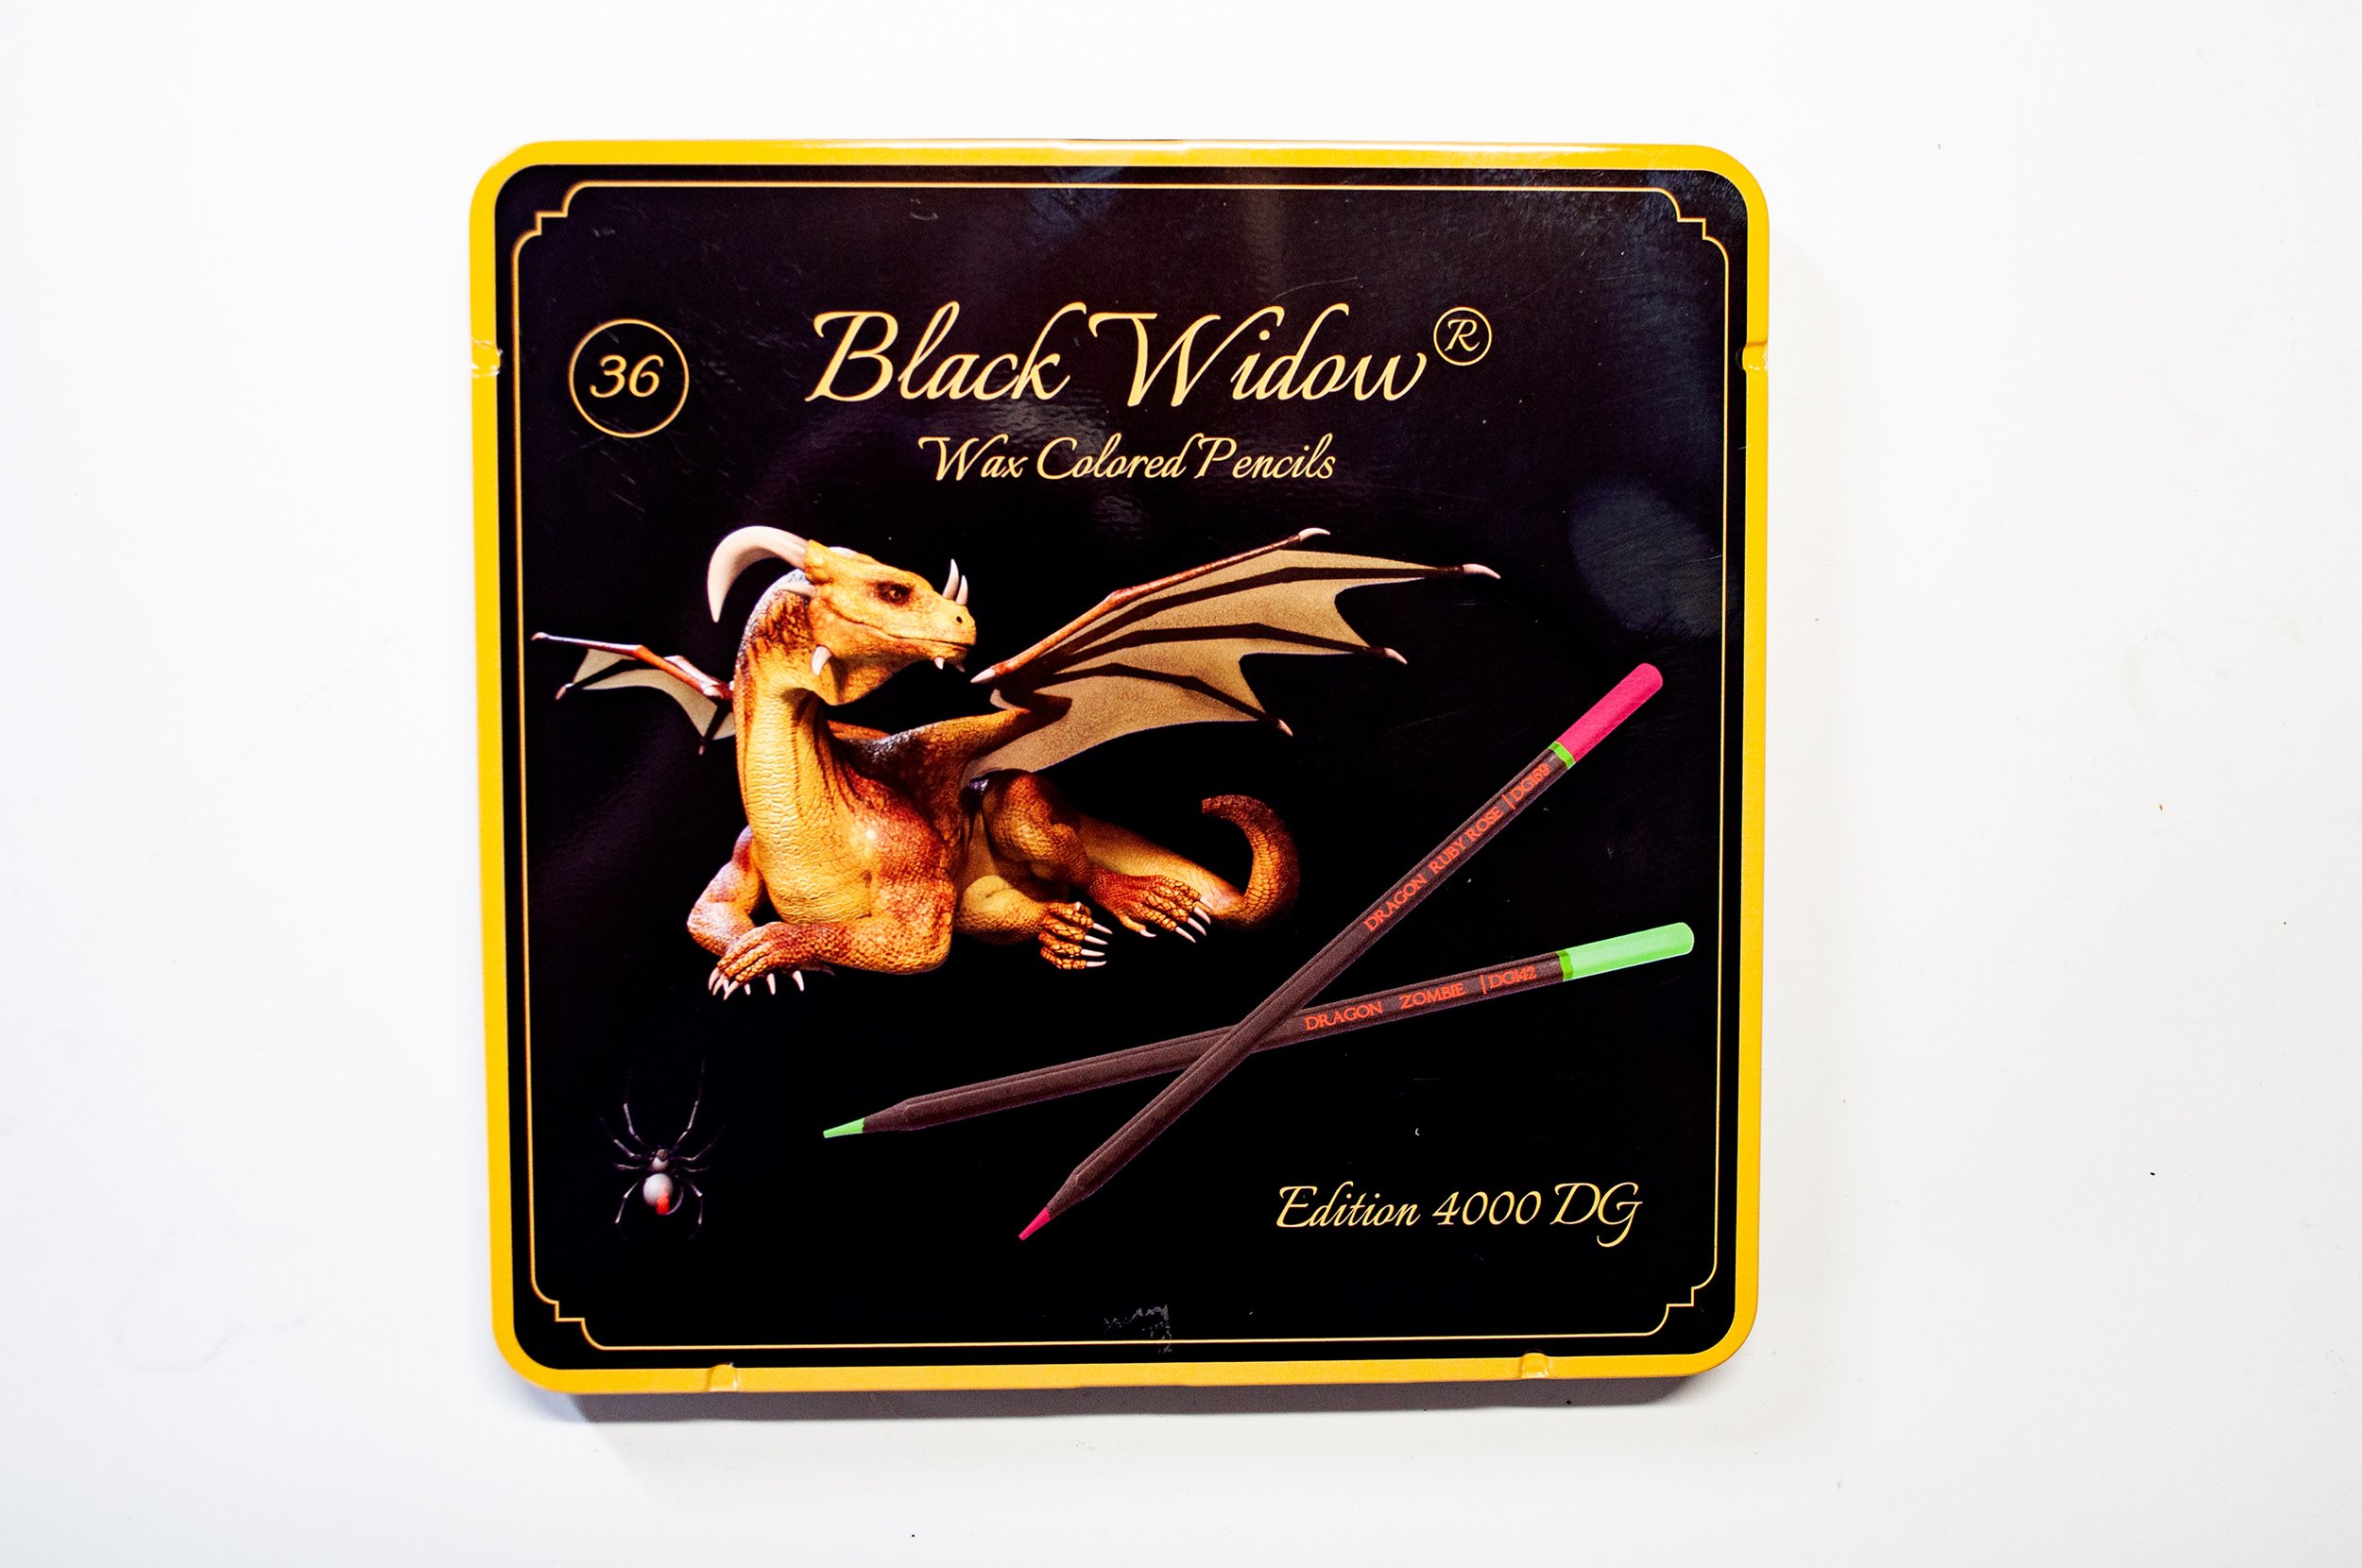  Black Widow Skin Tone Colored Pencils for Adult Coloring, 12 Color  Pencils for Portraits and Skintone Artists, A Complete Color Range, Now  With Light Fast Ratings. : Arts, Crafts & Sewing